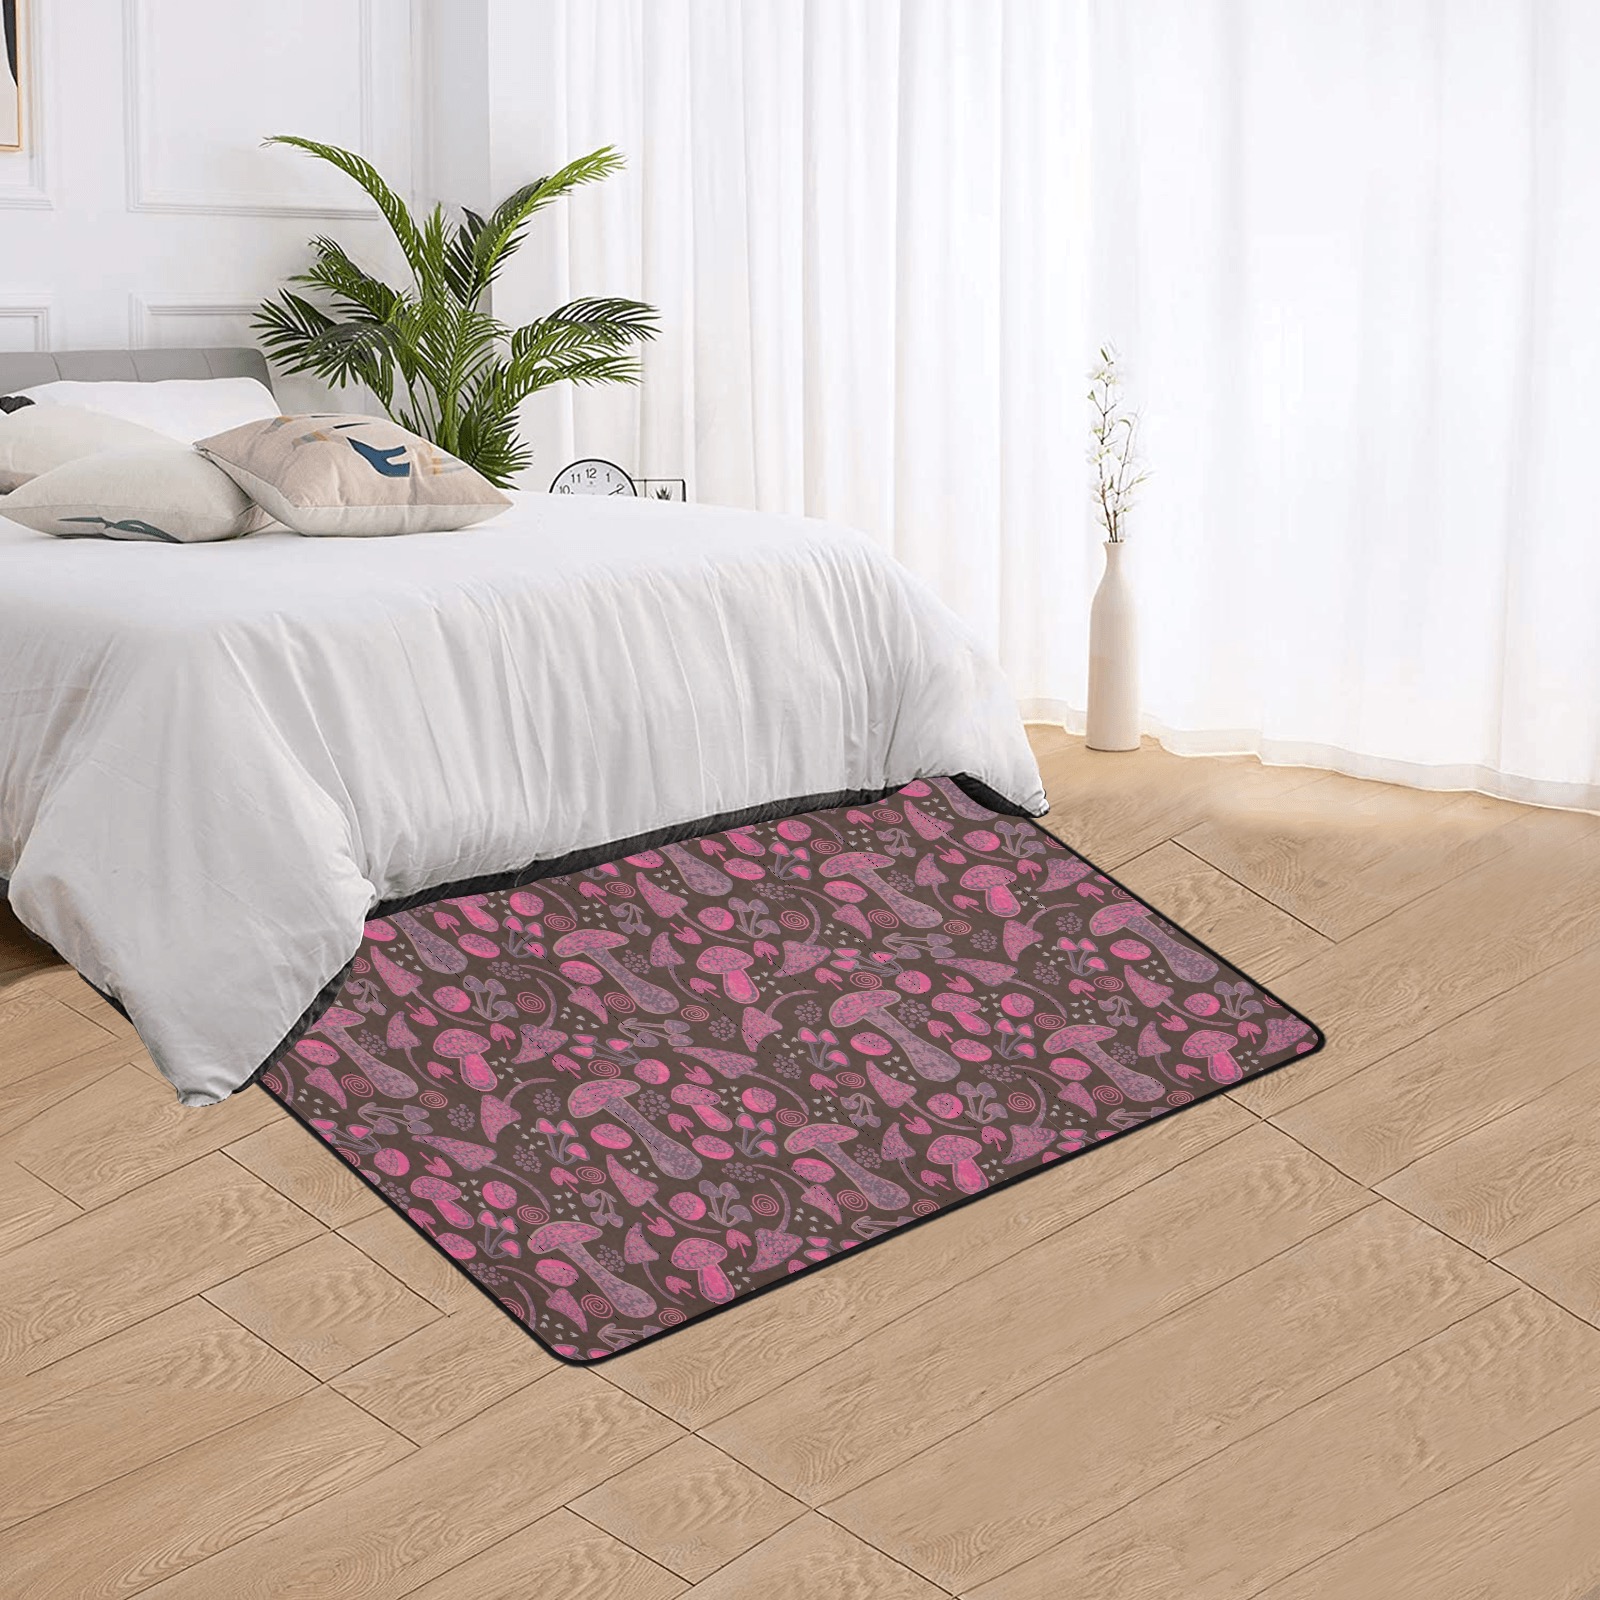 Unique fallpattern in pink Area Rug with Black Binding 5'x3'3''